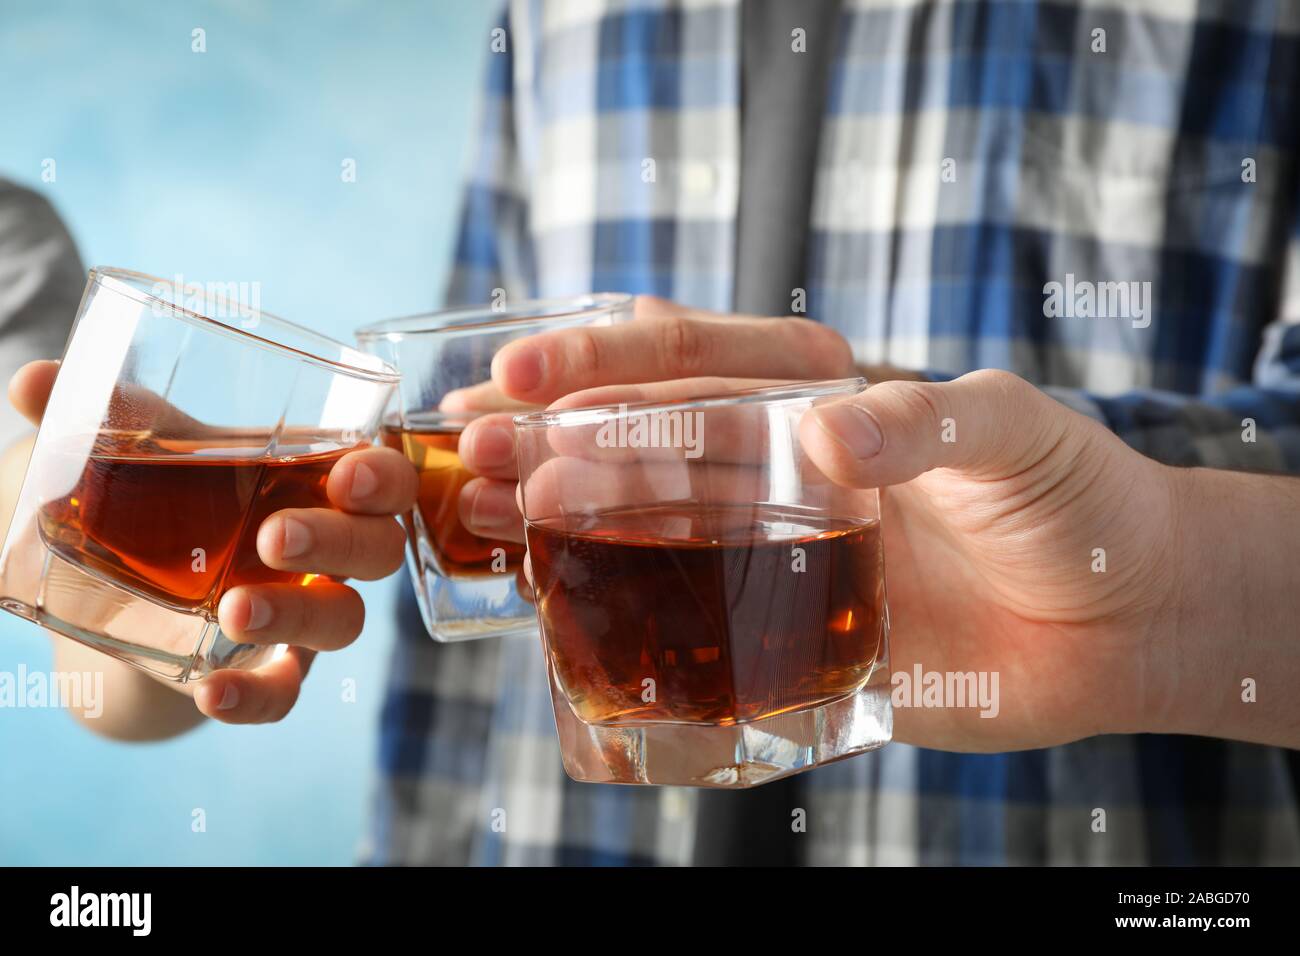 Men drink, cheers. Glasses of whiskey against blue background, close up Stock Photo